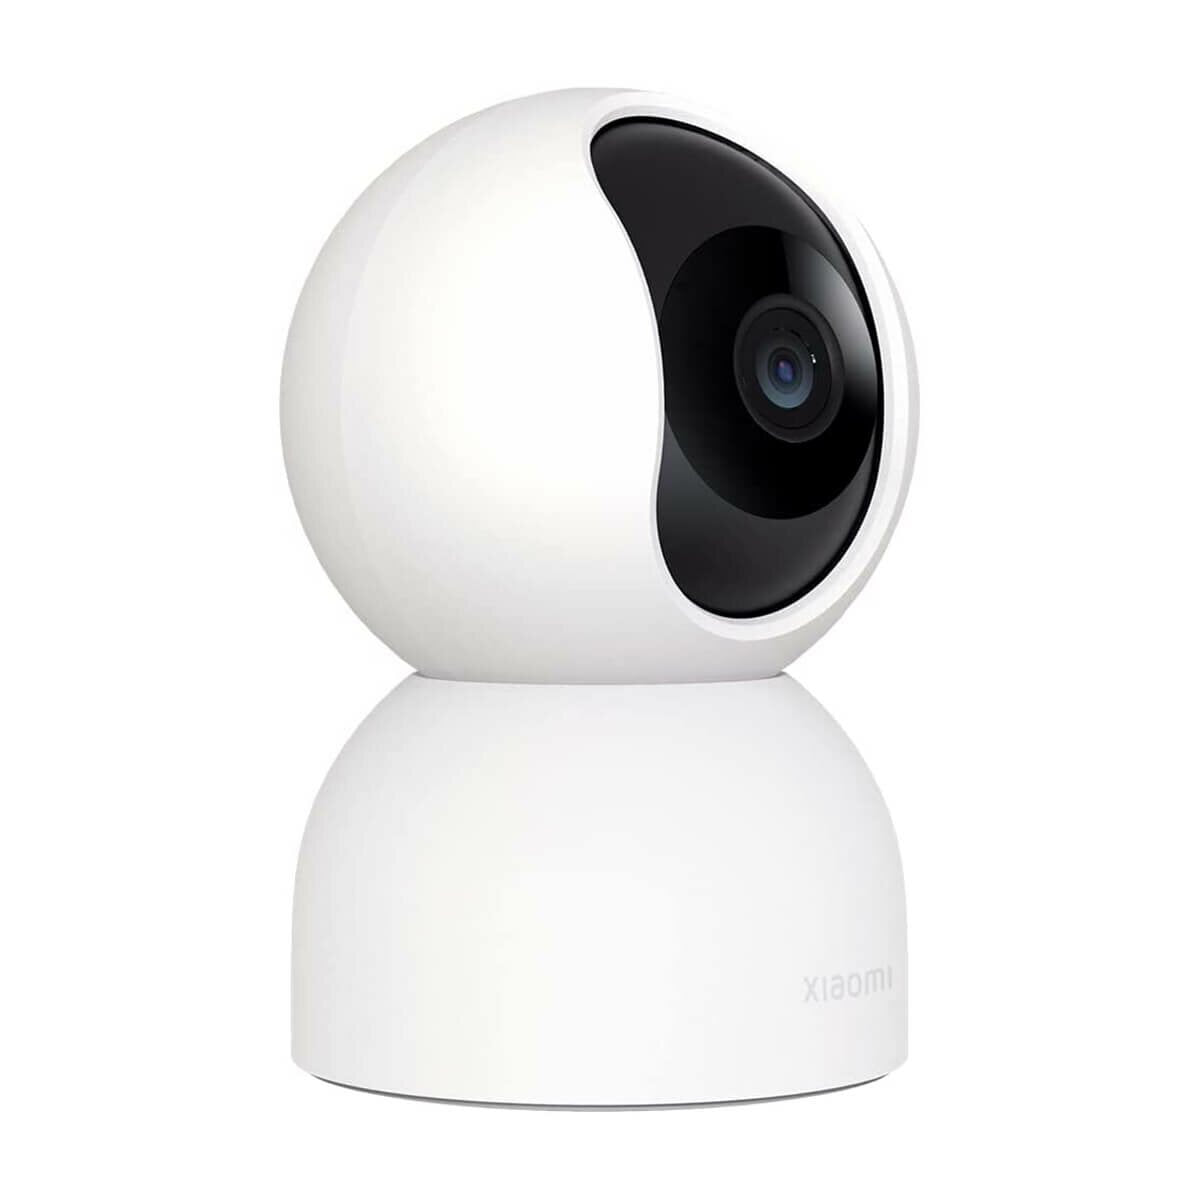 Xiaomi Smart Camera C400


Smart security with
 2.5K clarity

Updated to a 4MP camera with a resolution of 2560x1440

Combined with the 6P lens, the camera effectively reduces light refraction.

Night vision with no visible red glow for clearer and safer